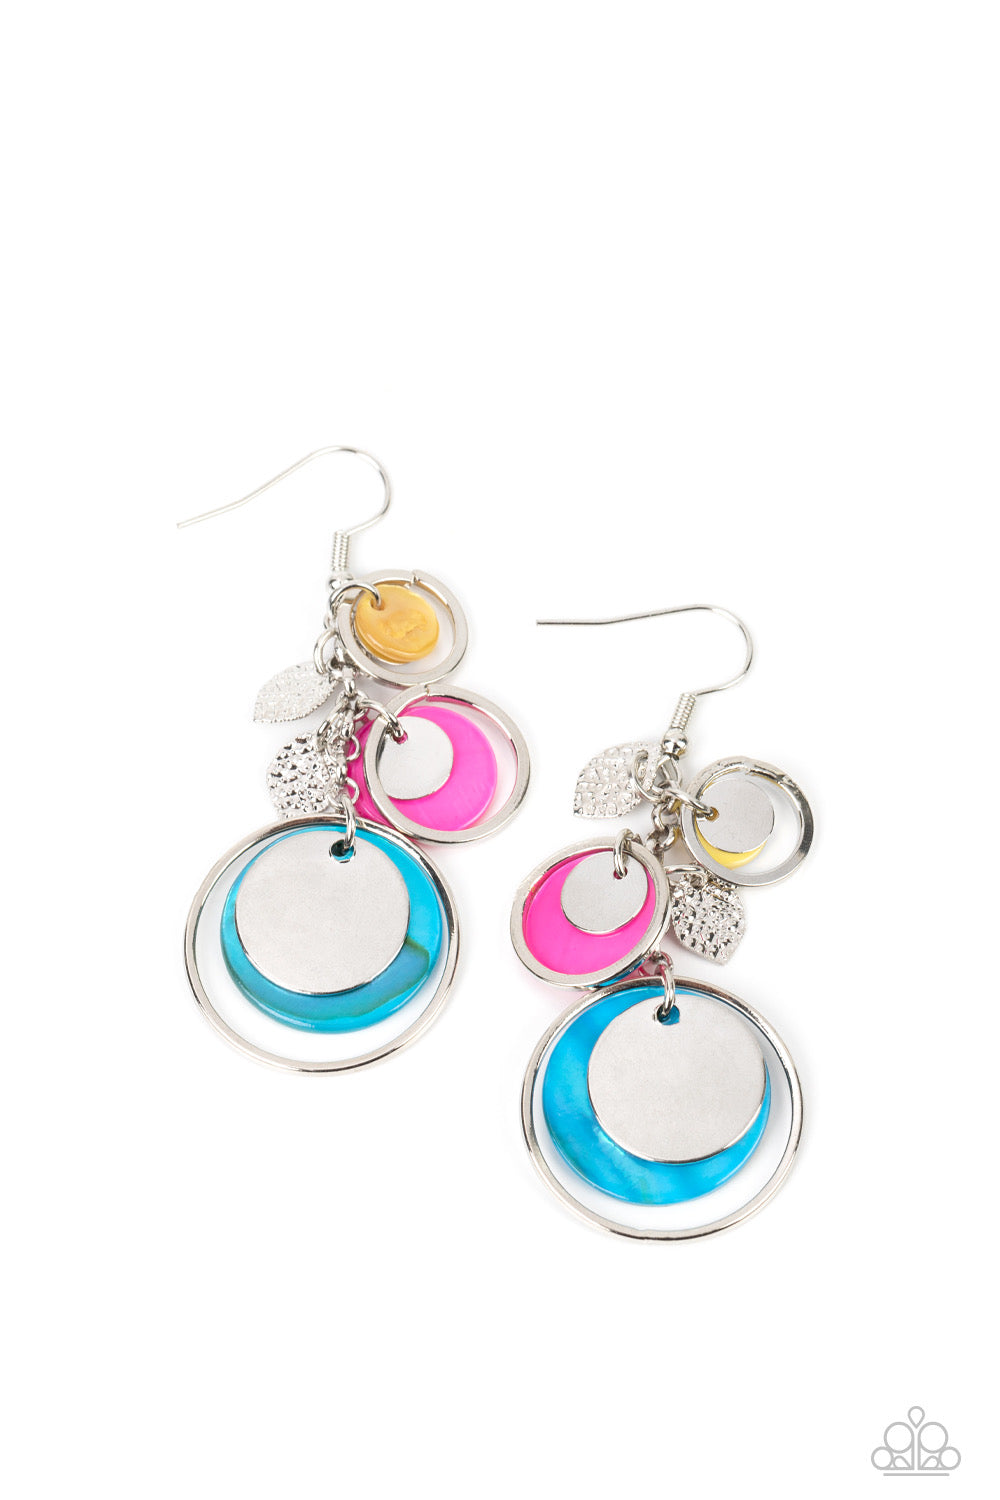 Colorful Earrings - Paparazzi Saved by the SHELL - Paparazzi Earrings Paparazzi jewelry images